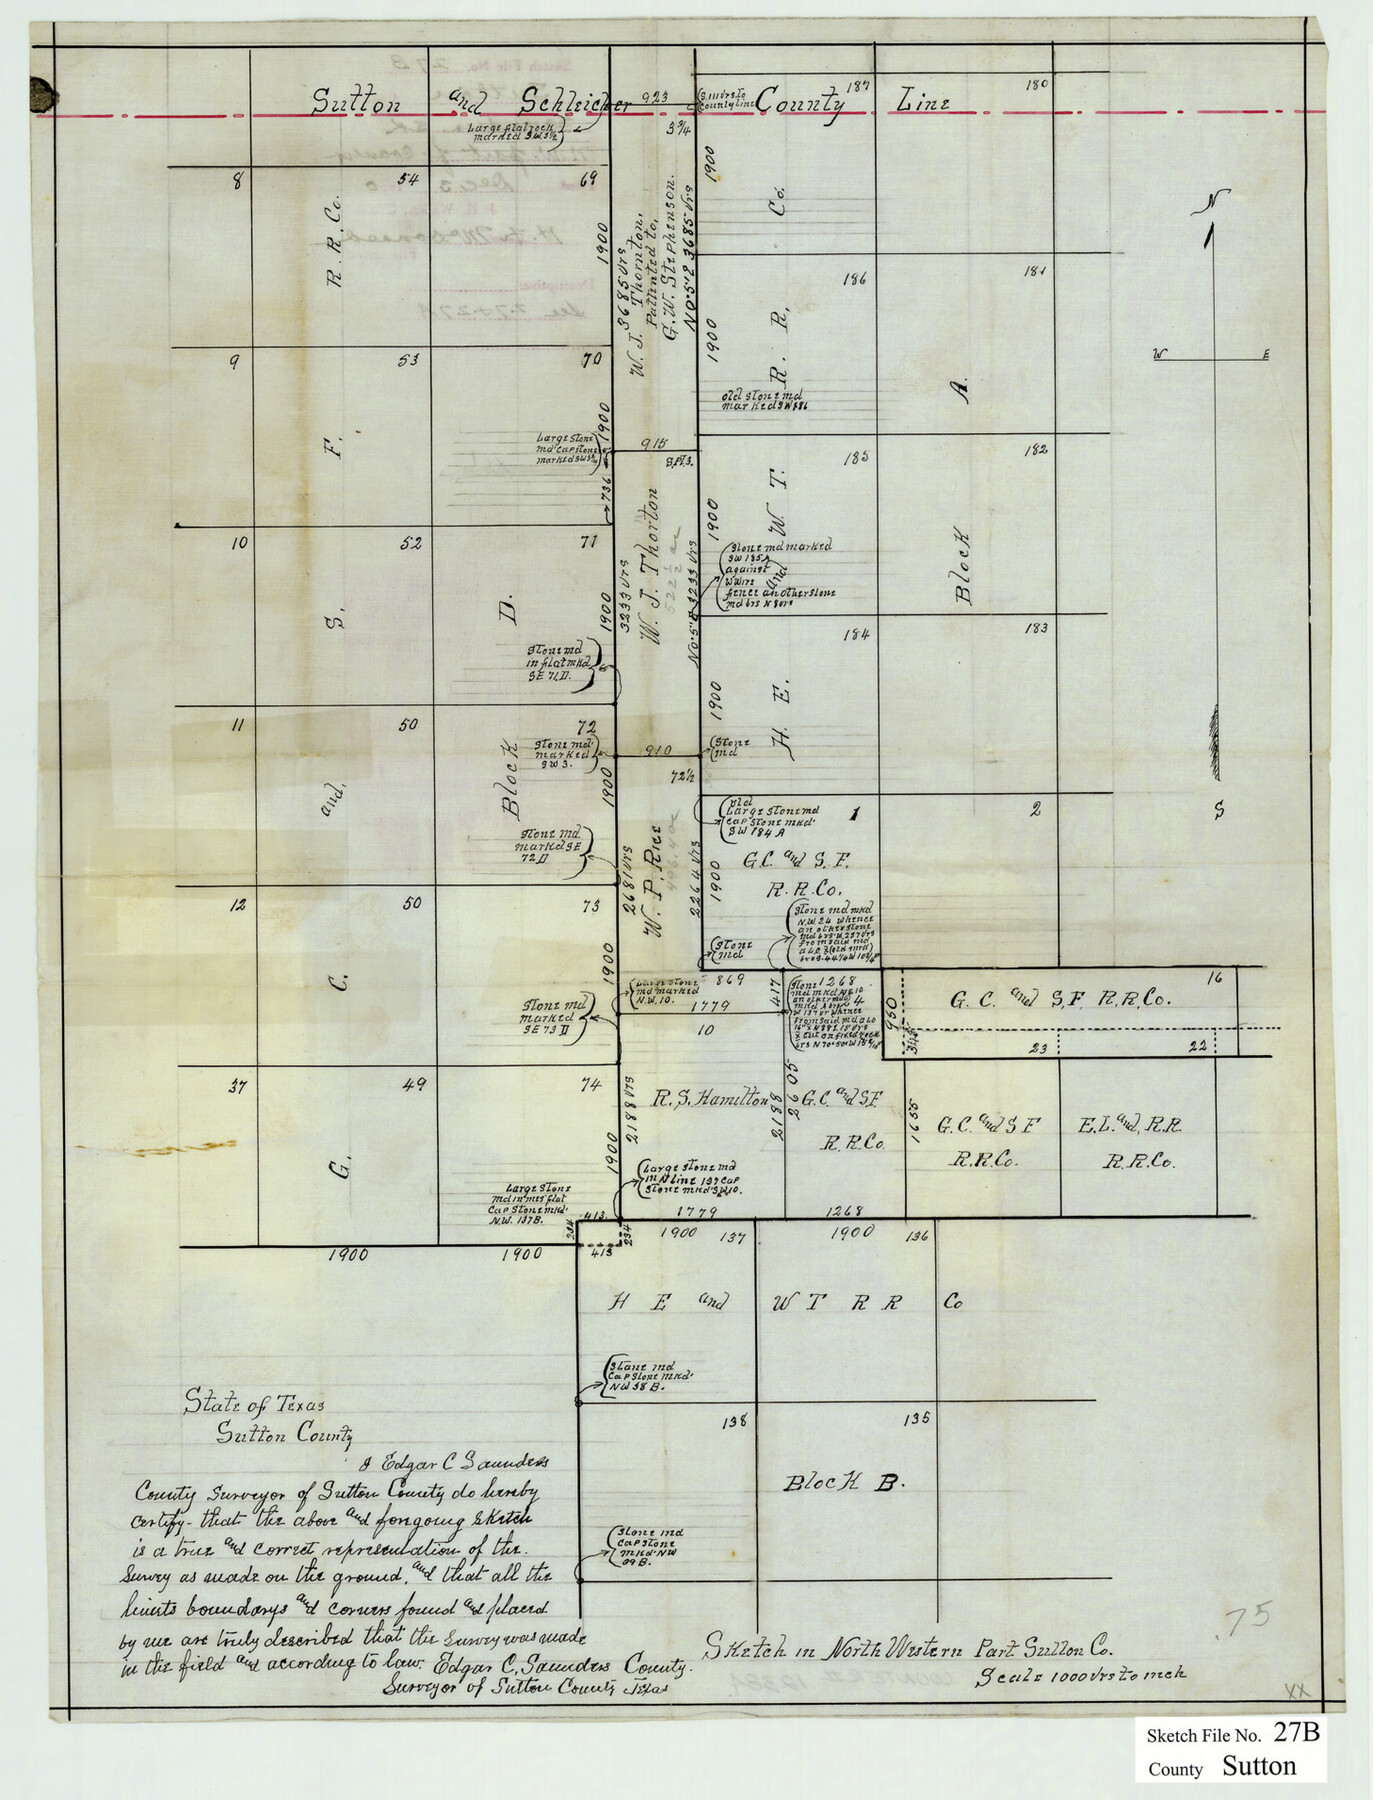 12384, Sutton County Sketch File 27B, General Map Collection